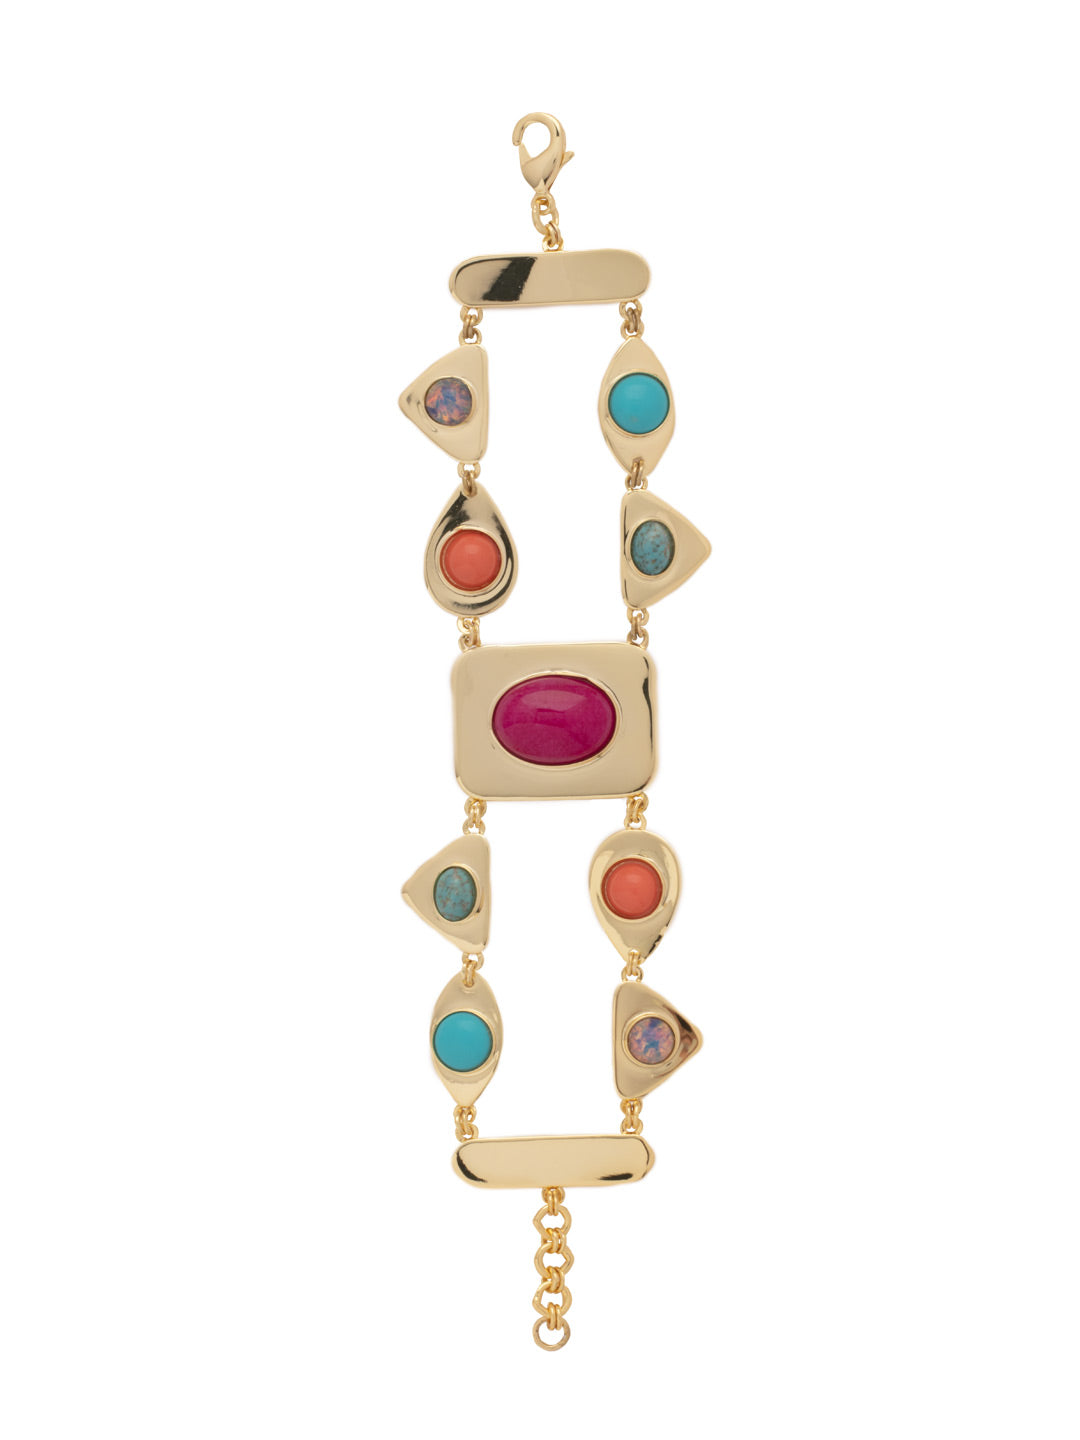 Janis Layered Tennis Bracelet - 4BFF171BGBML - <p>The Janis Layered Tennis Bracelet features two lines of colorful semi-precious stones with an adjustable chain, secured by a lobster claw clasp. From Sorrelli's BRIGHT MULTI collection in our Bright Gold-tone finish.</p>